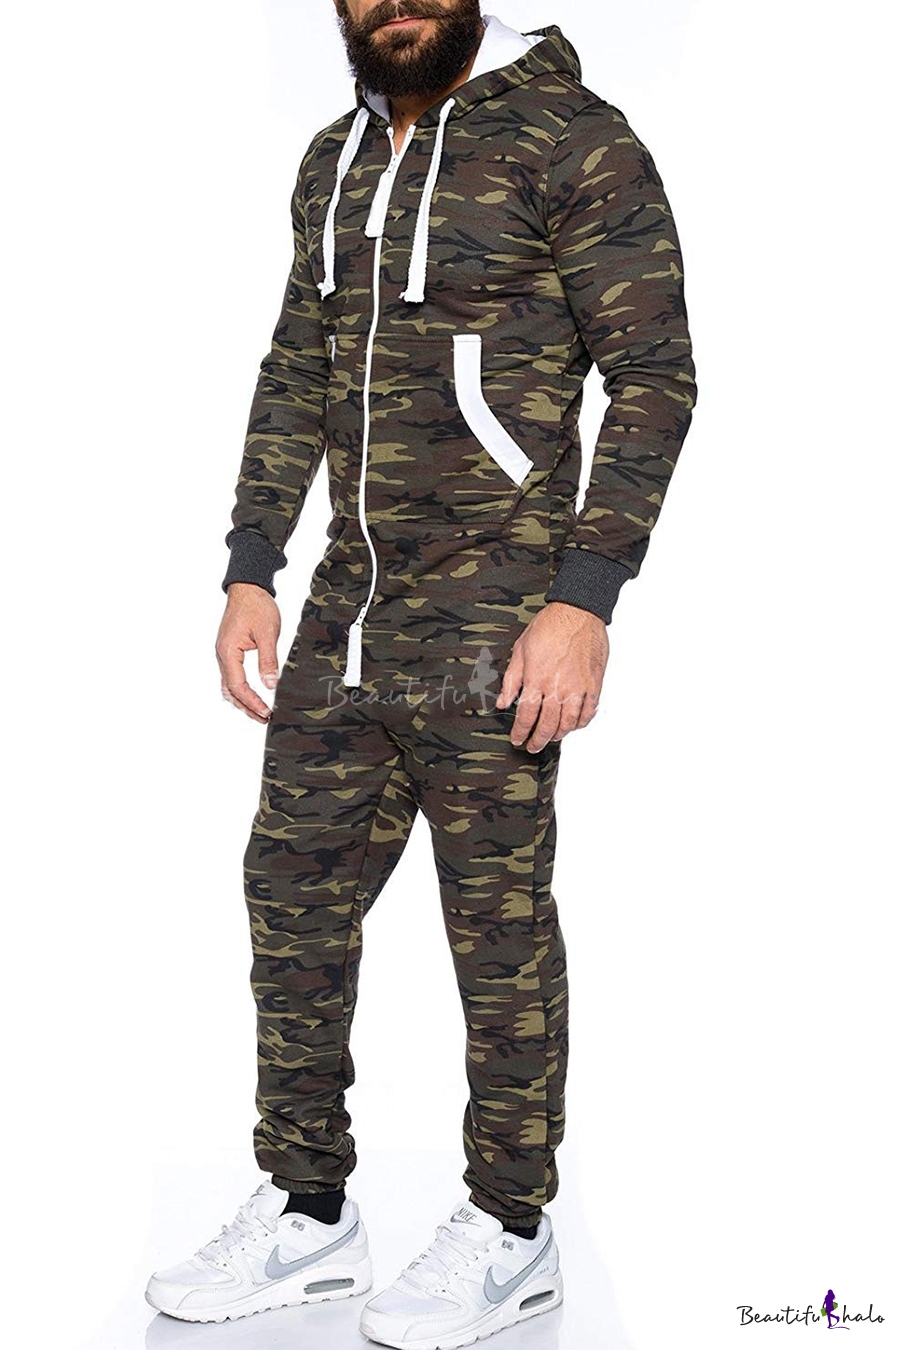 Mens New Stylish Camo Printed Long Sleeve Hooded Zip Up Loose Casual ...